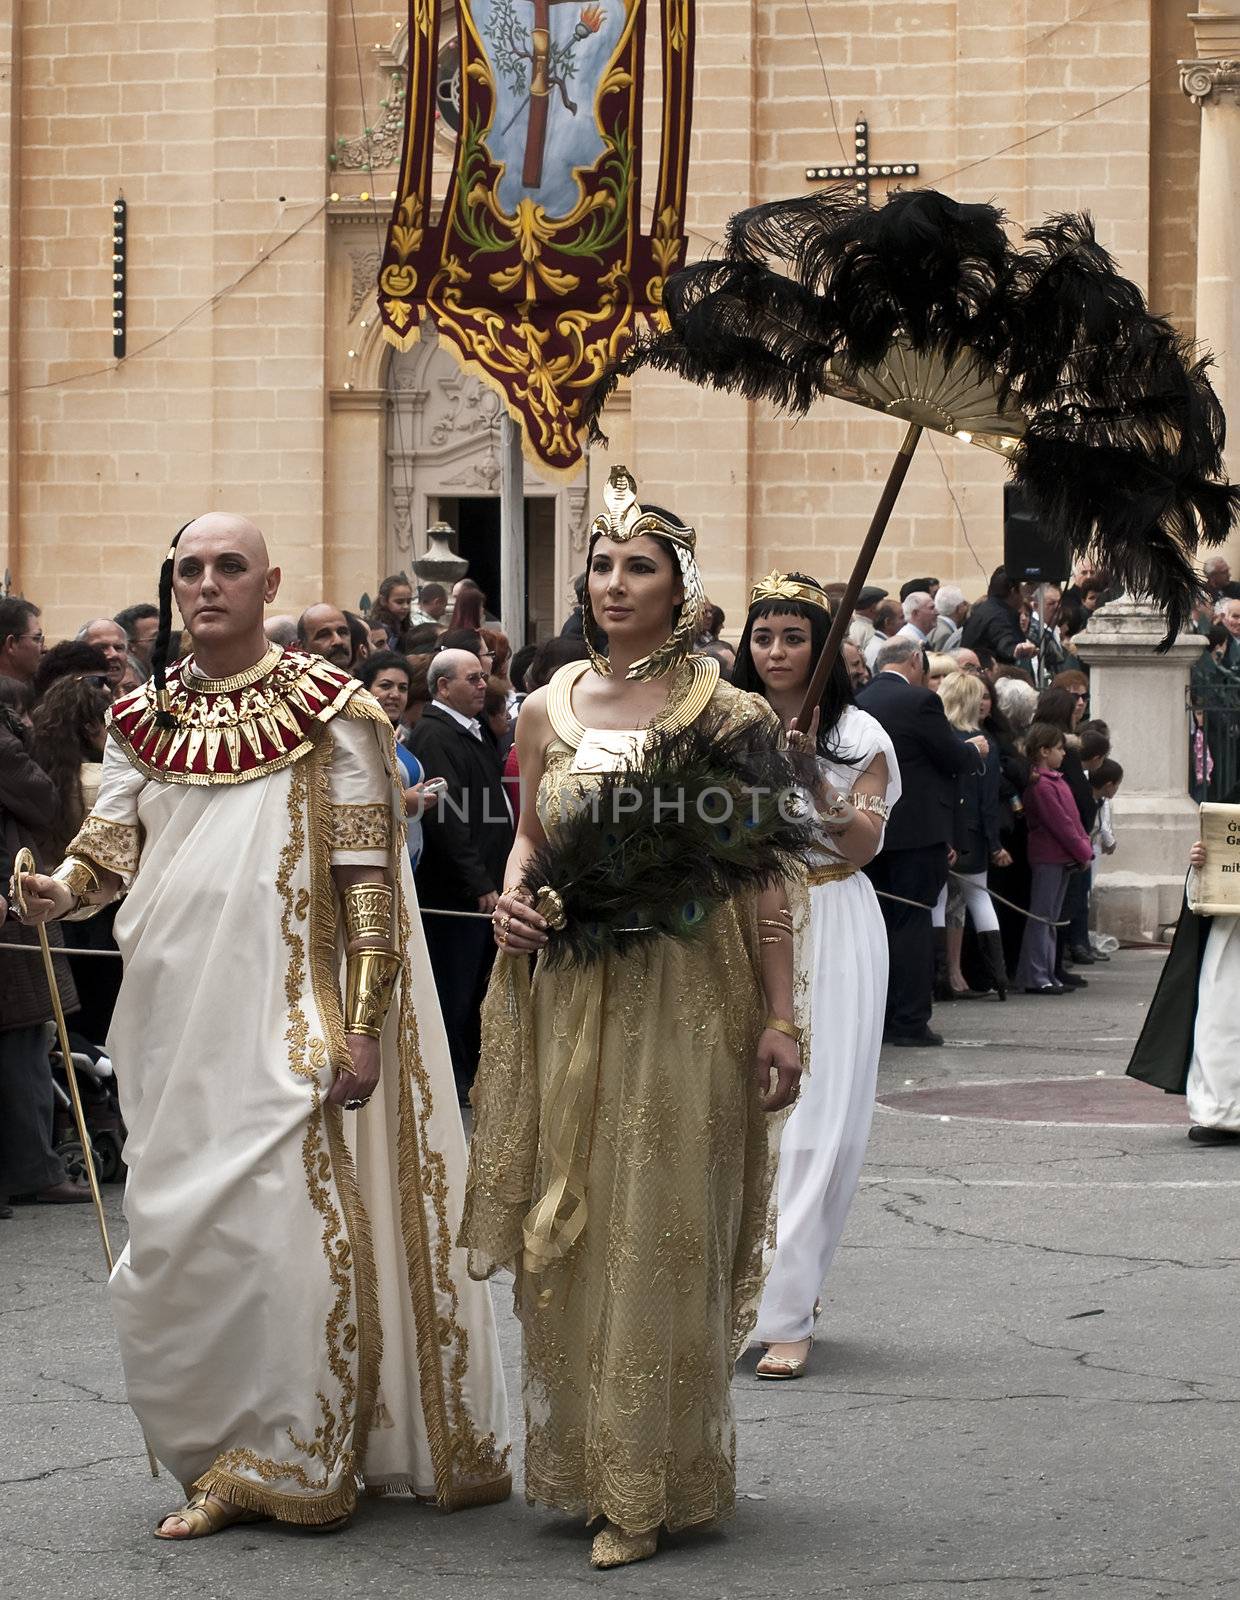 LUQA, MALTA - Friday 10th April 2009 - Egyptian pharaoh during the Good Friday procession in Malta